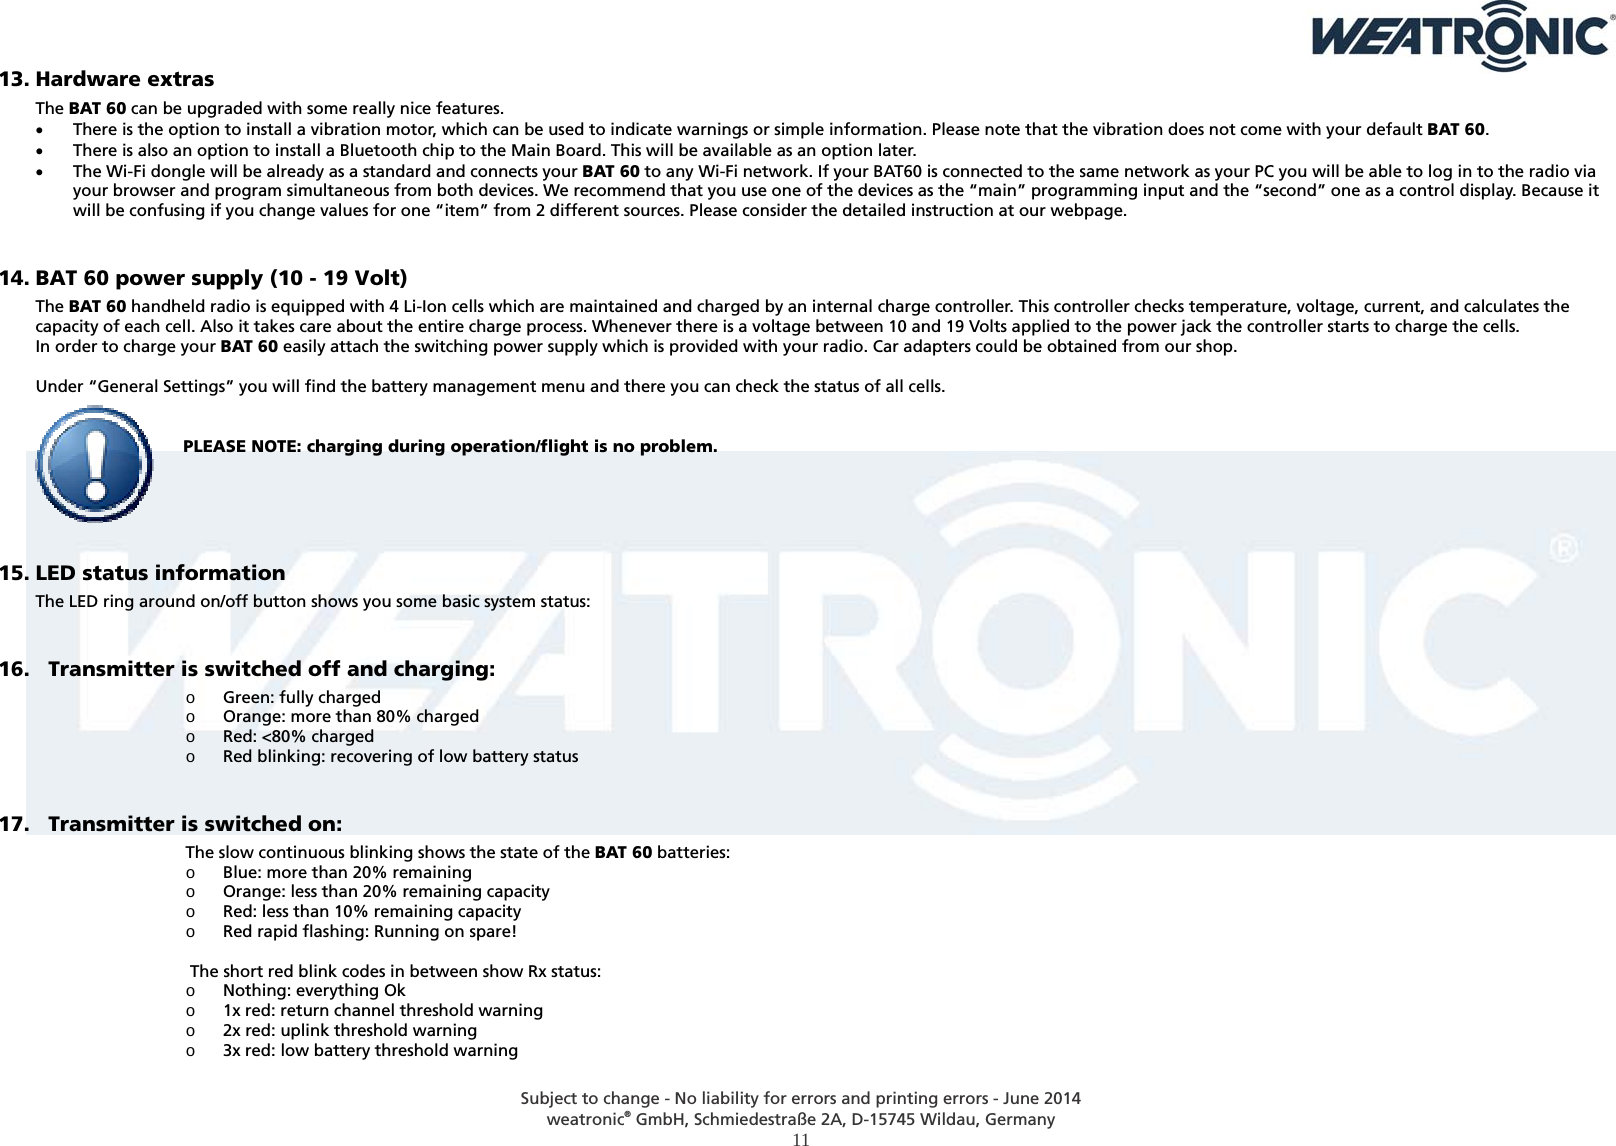  Subject to change - No liability for errors and printing errors - June 2014 weatronic® GmbH, Schmiedestraße 2A, D-15745 Wildau, Germany  11 13. Hardware extras The BAT 60 can be upgraded with some really nice features.  There is the option to install a vibration motor, which can be used to indicate warnings or simple information. Please note that the vibration does not come with your default BAT 60.  There is also an option to install a Bluetooth chip to the Main Board. This will be available as an option later.  The Wi-Fi dongle will be already as a standard and connects your BAT 60 to any Wi-Fi network. If your BAT60 is connected to the same network as your PC you will be able to log in to the radio via your browser and program simultaneous from both devices. We recommend that you use one of the devices as the “main” programming input and the “second” one as a control display. Because it will be confusing if you change values for one “item” from 2 different sources. Please consider the detailed instruction at our webpage.  14. BAT 60 power supply (10 - 19 Volt) The BAT 60 handheld radio is equipped with 4 Li-Ion cells which are maintained and charged by an internal charge controller. This controller checks temperature, voltage, current, and calculates the capacity of each cell. Also it takes care about the entire charge process. Whenever there is a voltage between 10 and 19 Volts applied to the power jack the controller starts to charge the cells.  In order to charge your BAT 60 easily attach the switching power supply which is provided with your radio. Car adapters could be obtained from our shop.   Under “General Settings” you will find the battery management menu and there you can check the status of all cells.   PLEASE NOTE: charging during operation/flight is no problem.      15. LED status information  The LED ring around on/off button shows you some basic system status:  16.   Transmitter is switched off and charging: o Green: fully charged o Orange: more than 80% charged o Red: &lt;80% charged o Red blinking: recovering of low battery status  17.   Transmitter is switched on: The slow continuous blinking shows the state of the BAT 60 batteries: o Blue: more than 20% remaining o Orange: less than 20% remaining capacity o Red: less than 10% remaining capacity o Red rapid flashing: Running on spare!   The short red blink codes in between show Rx status: o Nothing: everything Ok o 1x red: return channel threshold warning o 2x red: uplink threshold warning o 3x red: low battery threshold warning  